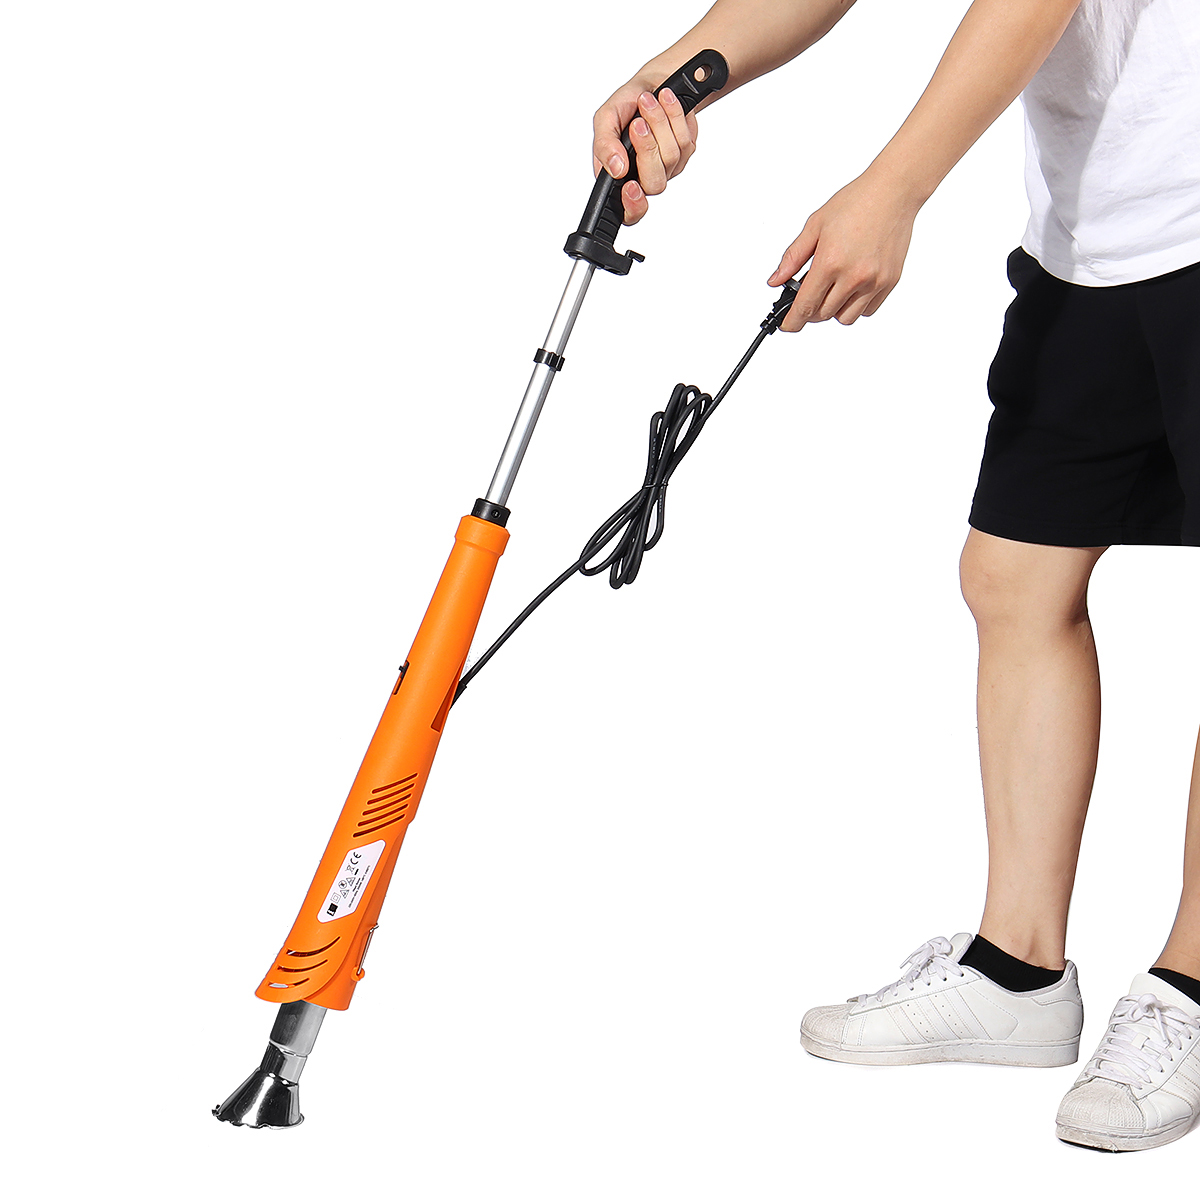 2000W-Electric-Weed-Burner-Detachable-Torch-Shape-Thermal-Trimmer-Hot-Air-Lawn-Killer-1753599-8